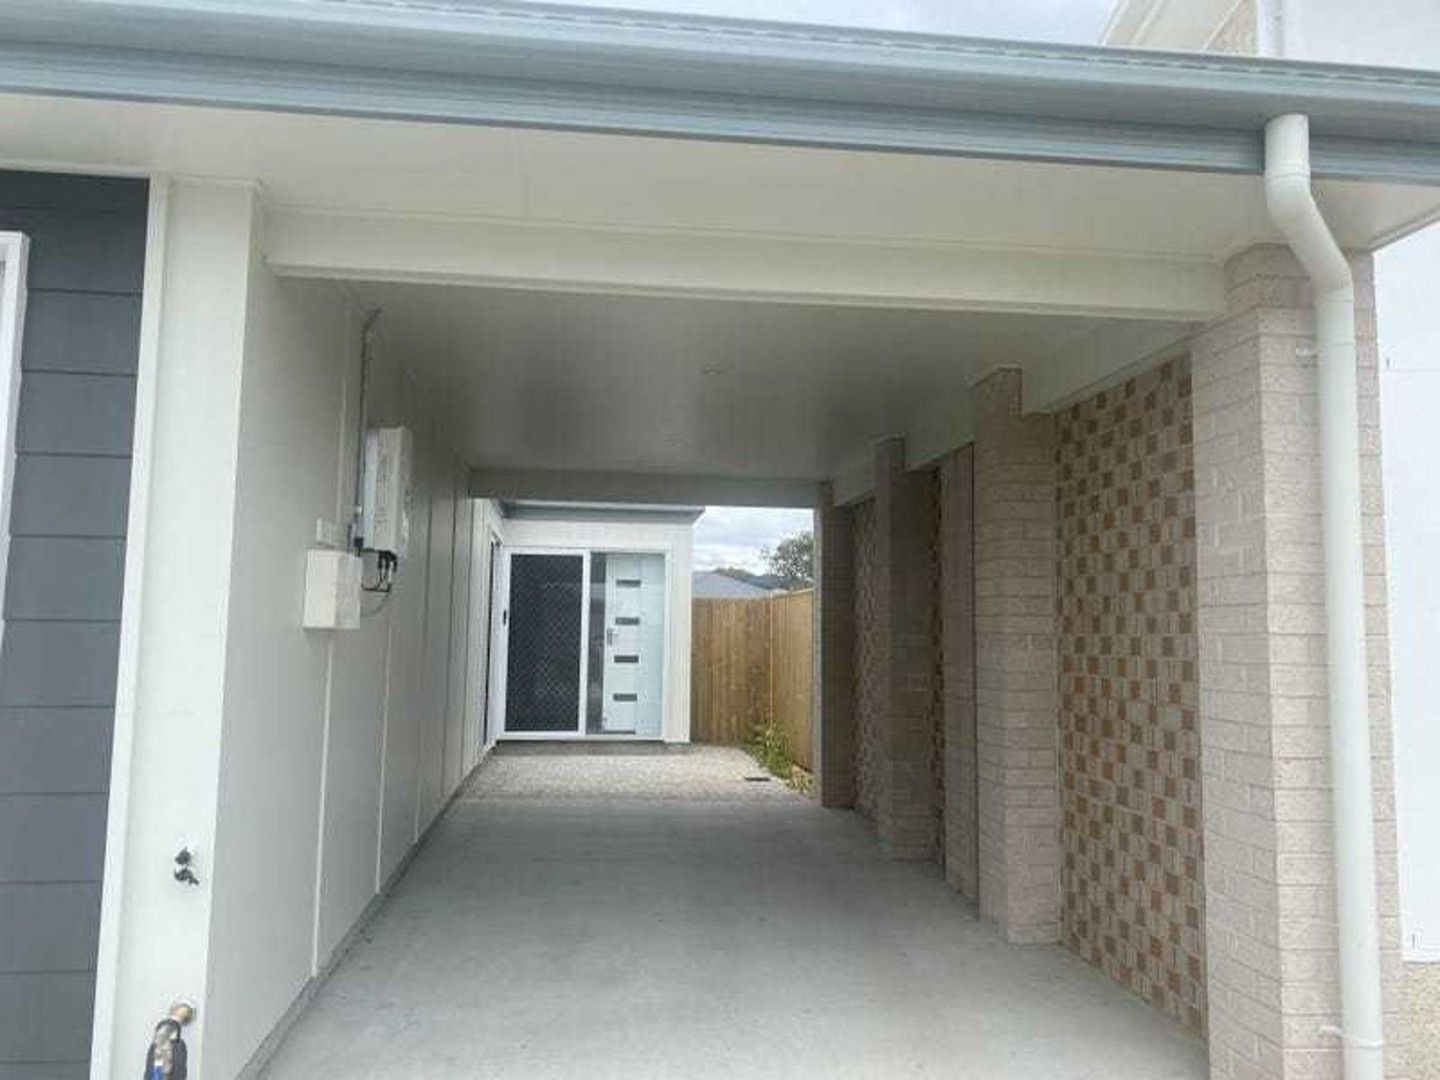 2 bedrooms Duplex in 2/24 Chisolm Way PIMPAMA QLD, 4209